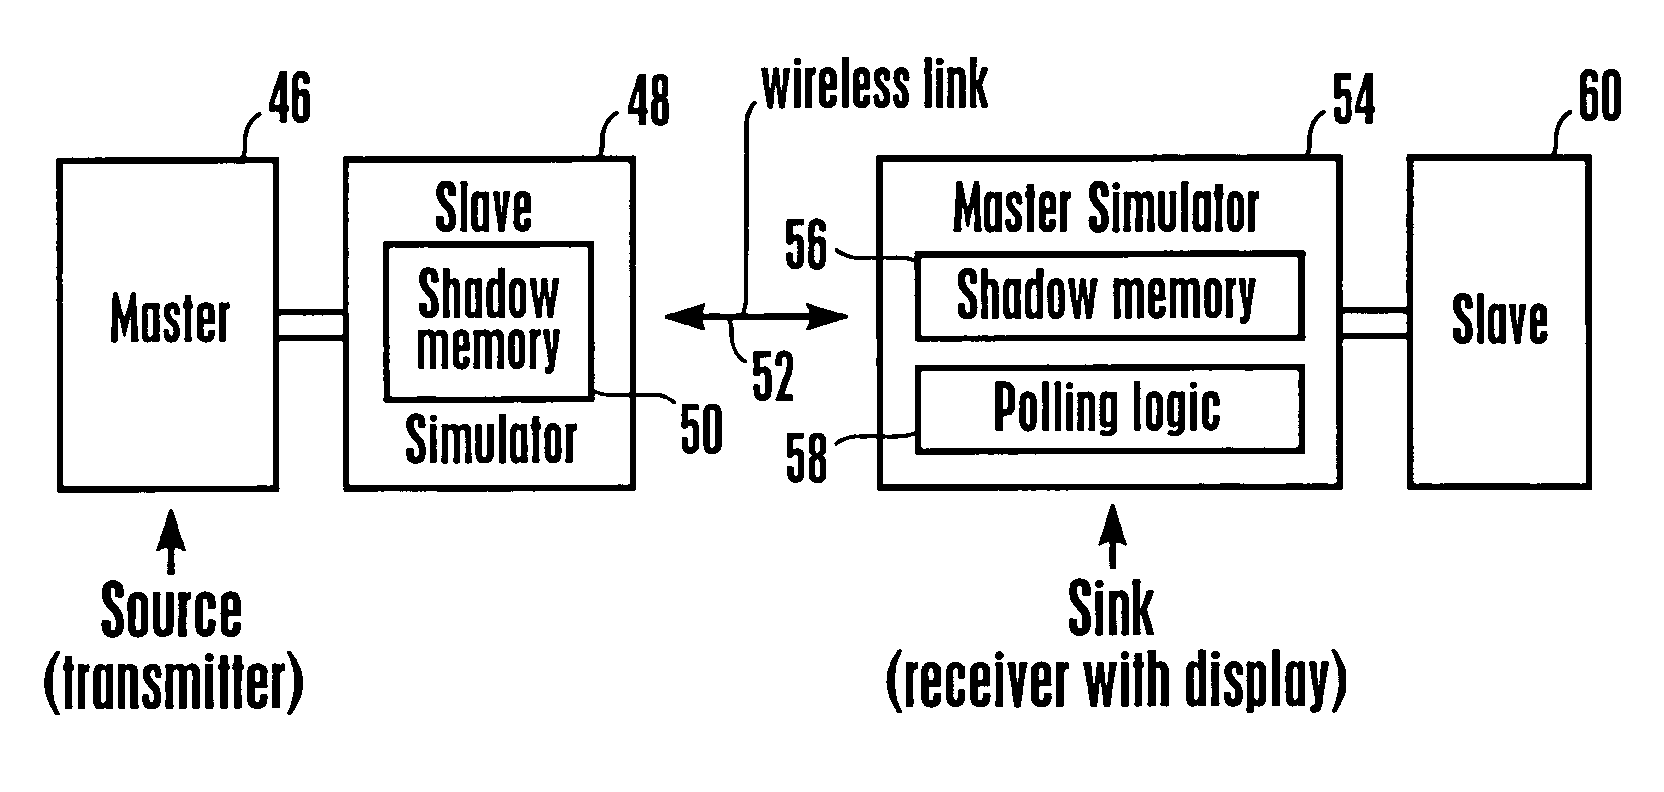 Method and system for processing wireless digital multimedia